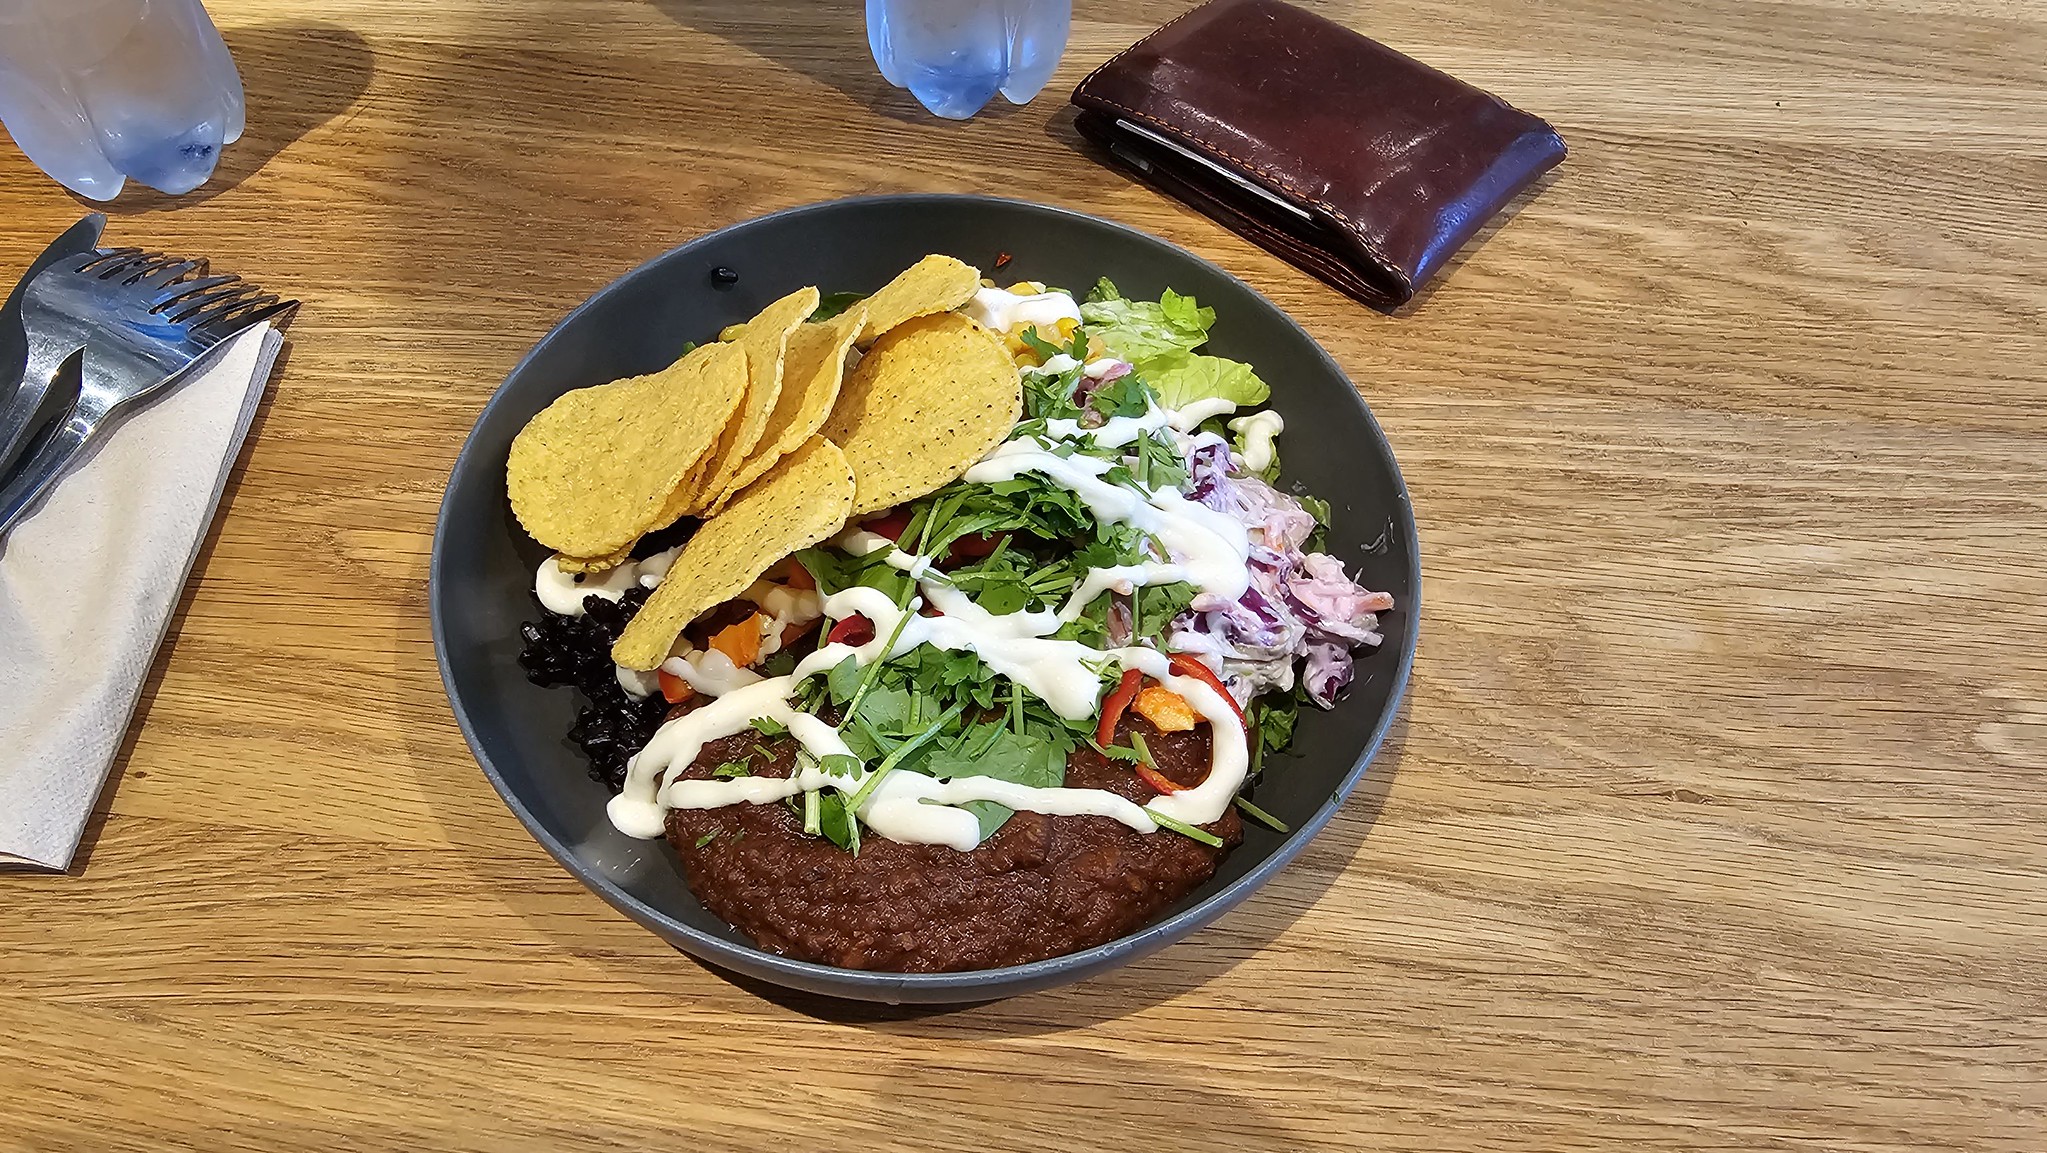 My chilli bowl enjoyed at Holy Greens in Stockholm